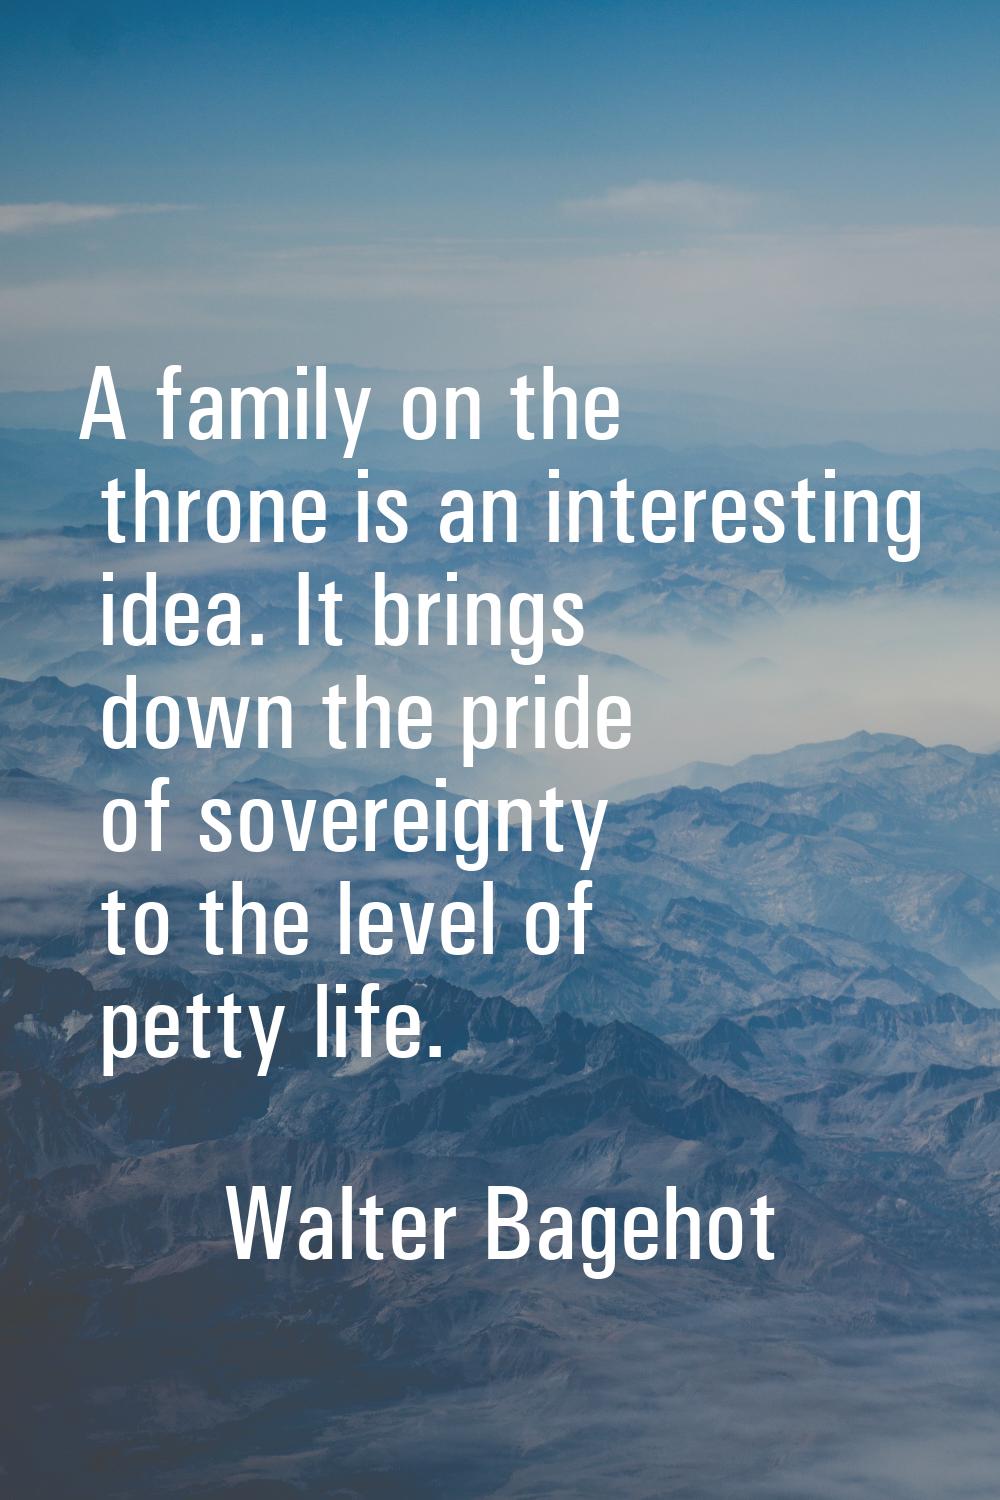 A family on the throne is an interesting idea. It brings down the pride of sovereignty to the level